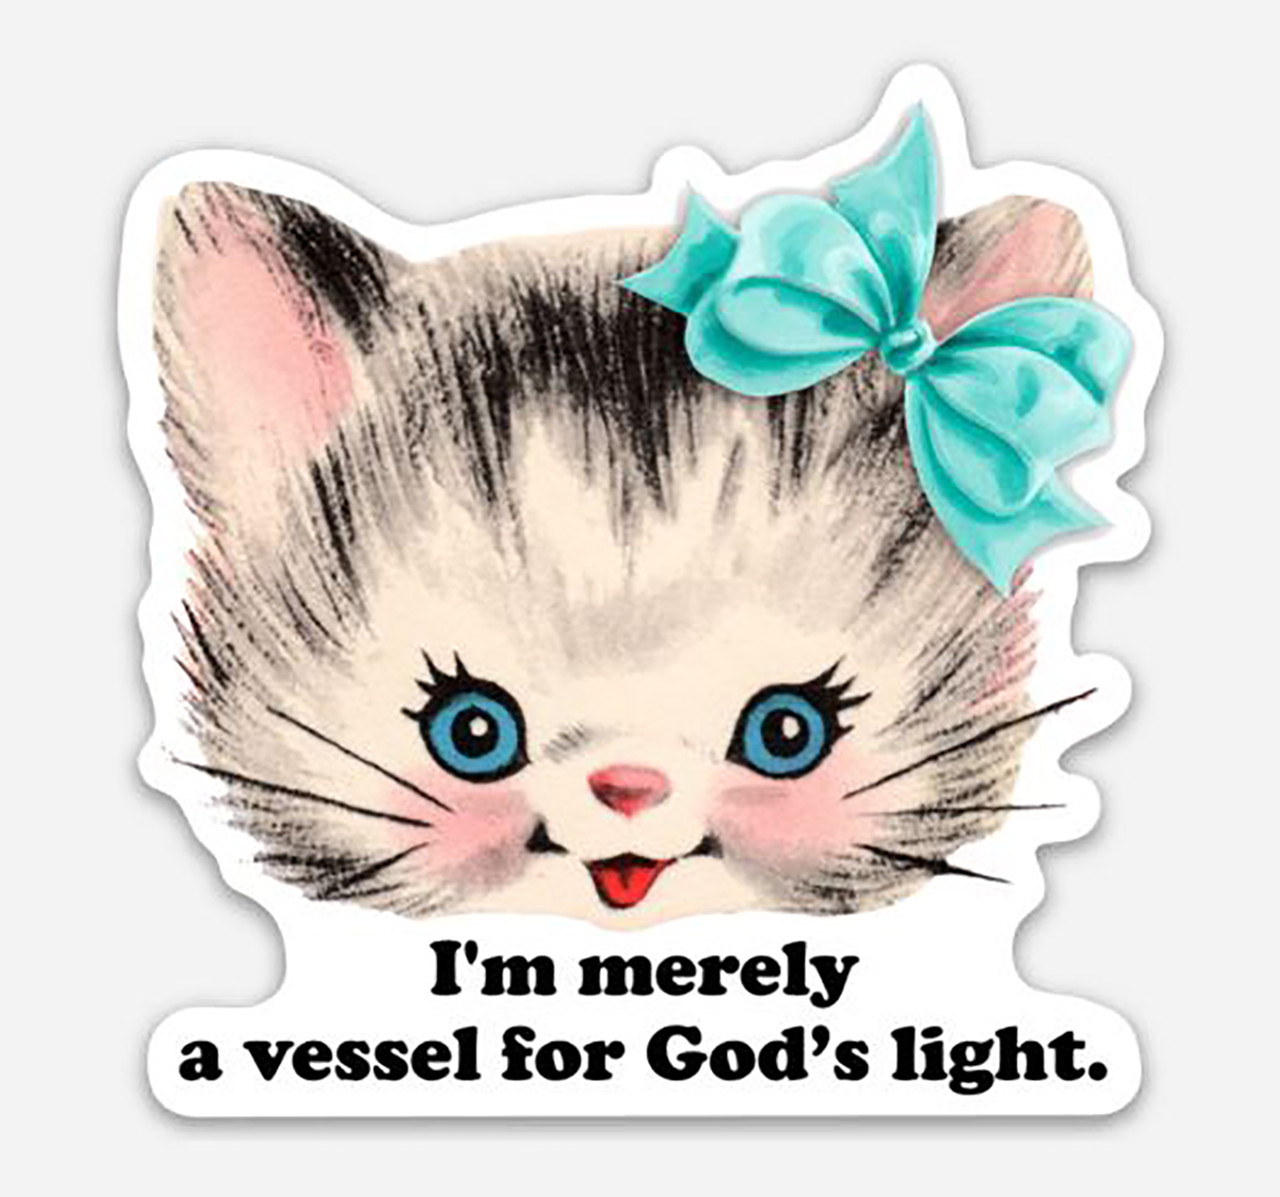 2-pack I'm Merely a Vessel for God's Light Vinyl Decals - Kitsch Cute Cat Kitten Die Cut Stickers